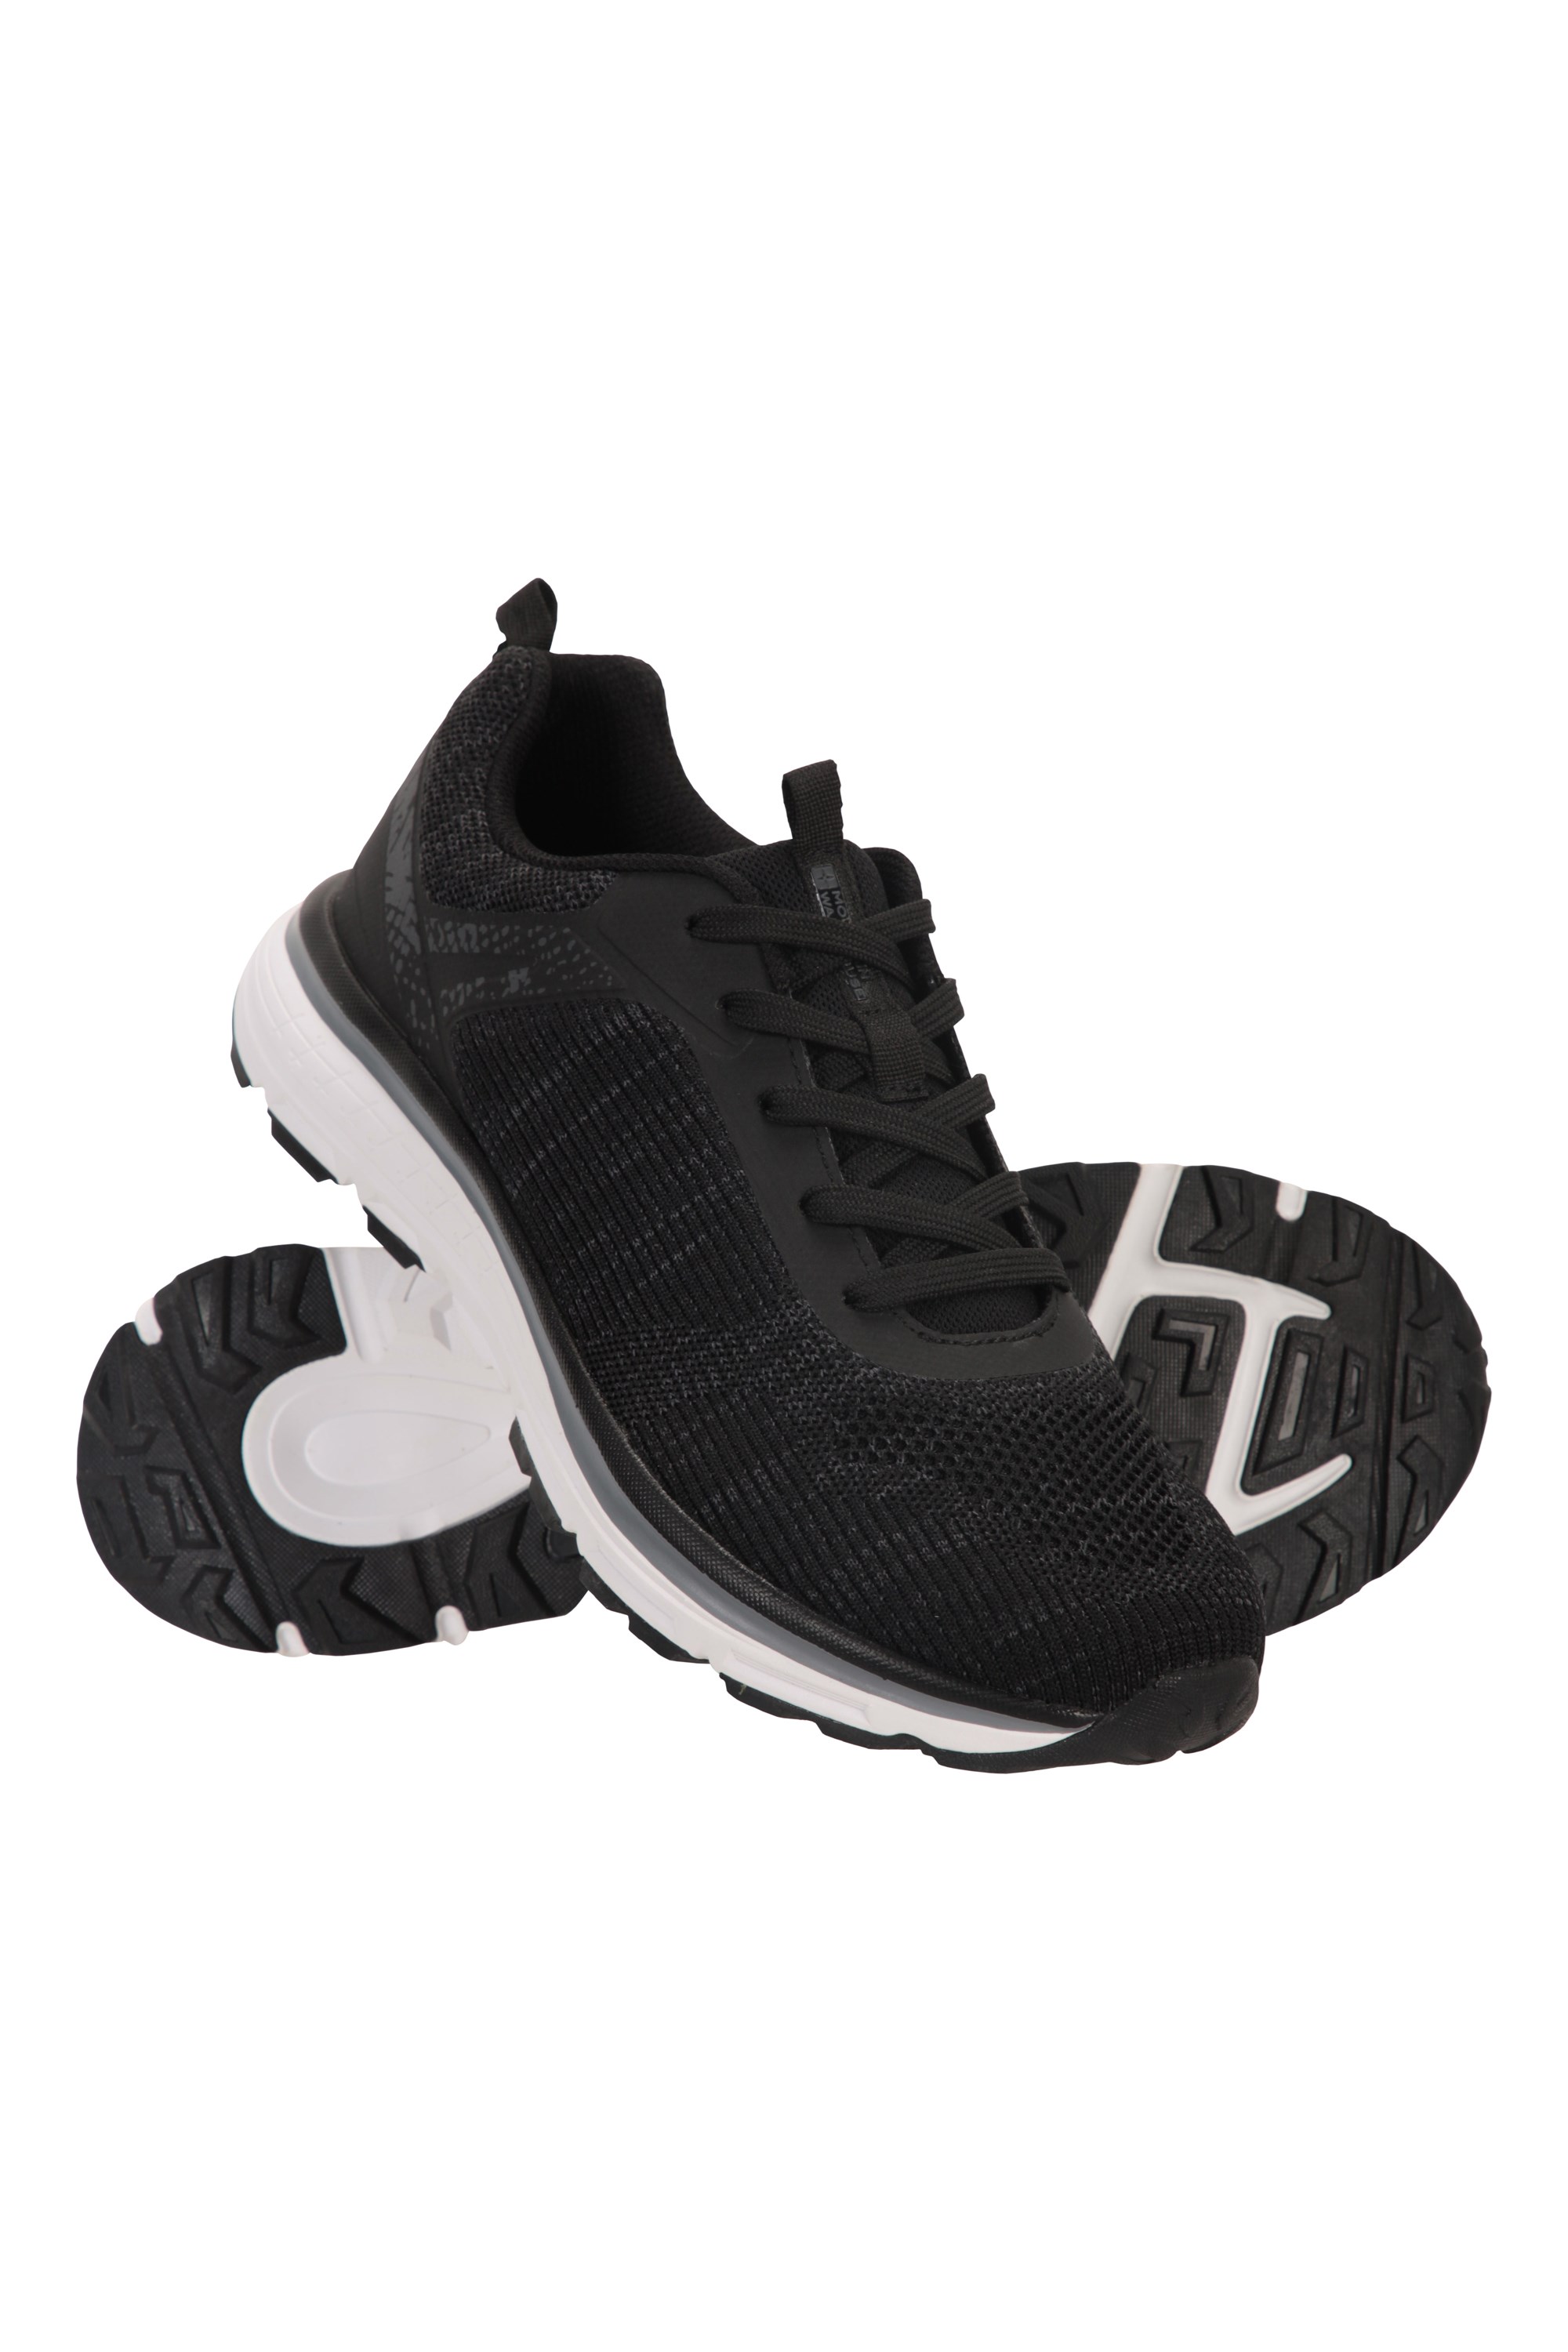 Active Shoes Gift Guide - The Styled Press